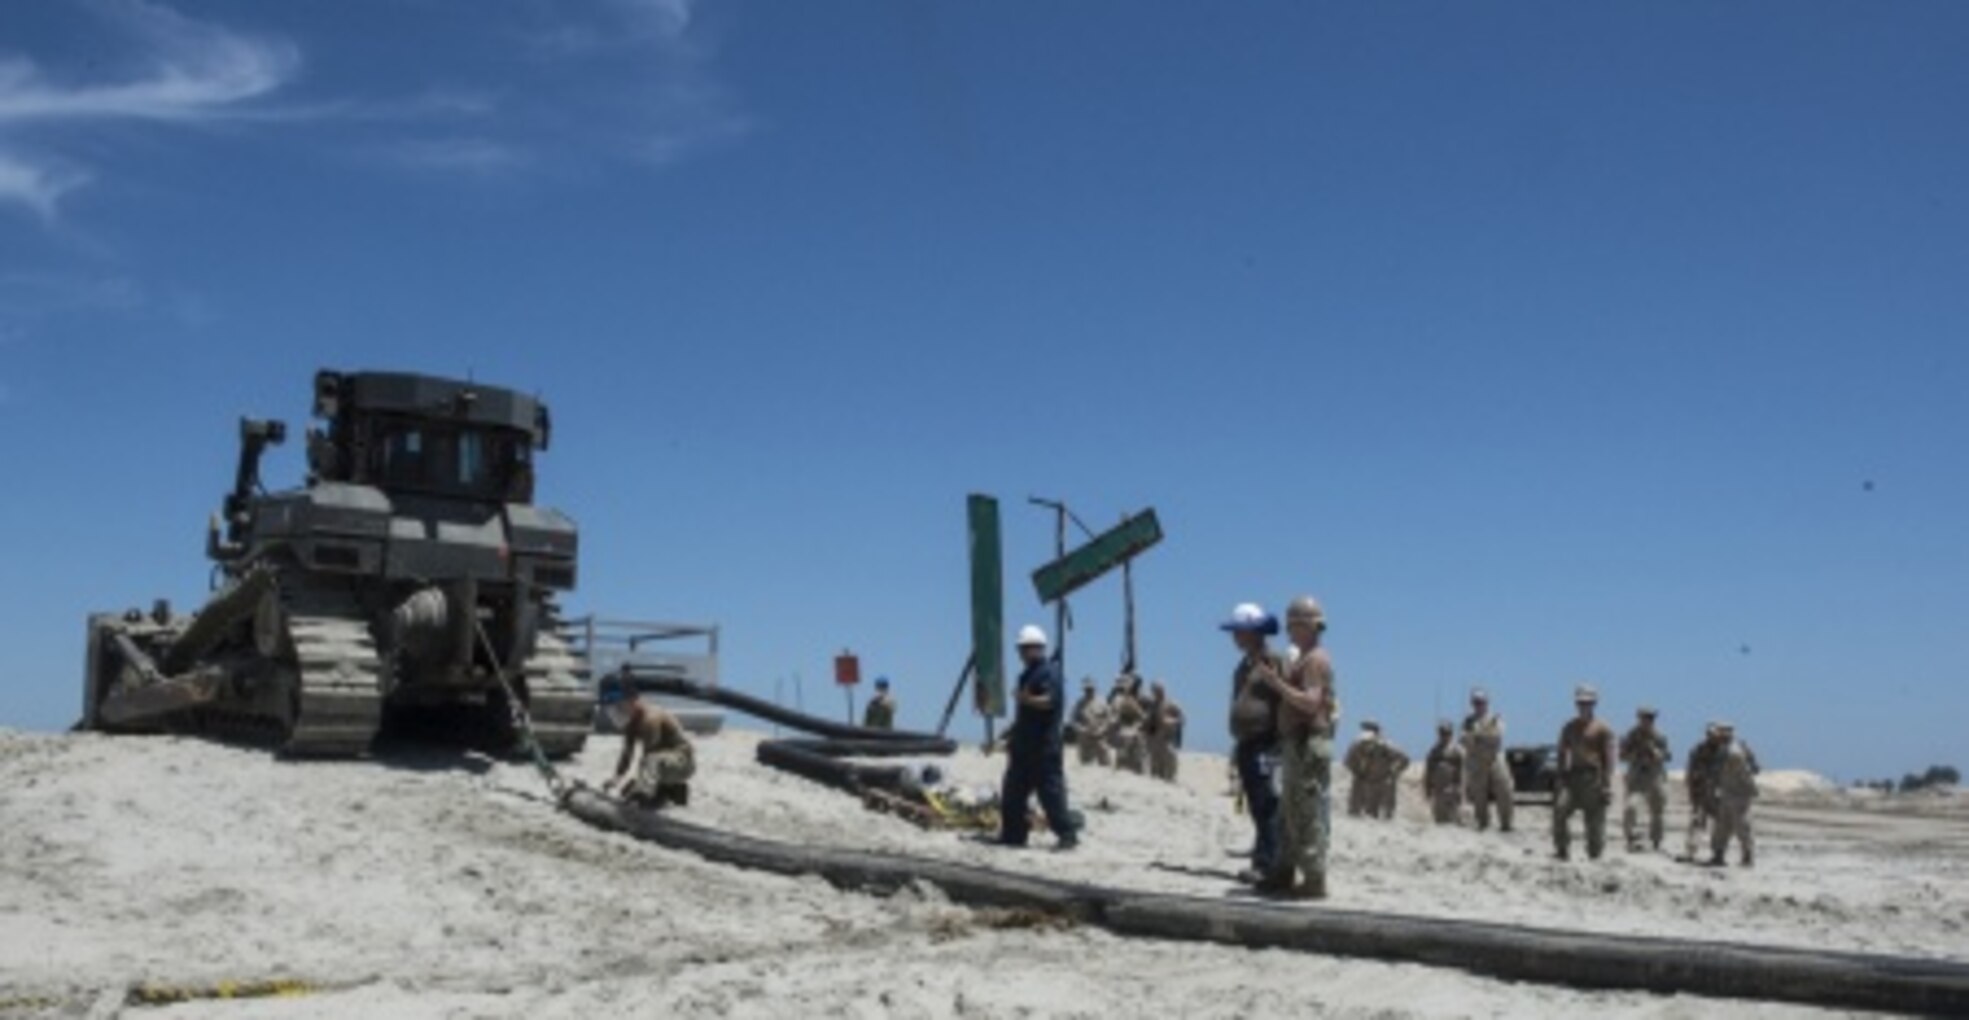 Marines with Bulk Fuel Co., 1st Marine Logistics Group, team up with Sailors from Amphibious Construction Battalion 1 to perform a beach unloading exercise using the Beach Termination Unit, in Coronado, Calif., Aug. 1-4, 2015. Approximately 30 Marines with Bulk Fuel Company, 7th Engineer Support Battalion, 1st Marine Logistics Group, teamed up with Sailors from Amphibious Construction Battalion 1 to conduct a beach unloading exercise. What made the training unique was the use of the BTU, which allows Marines to transfer fuel from a ship out in the ocean to Marines on land.
